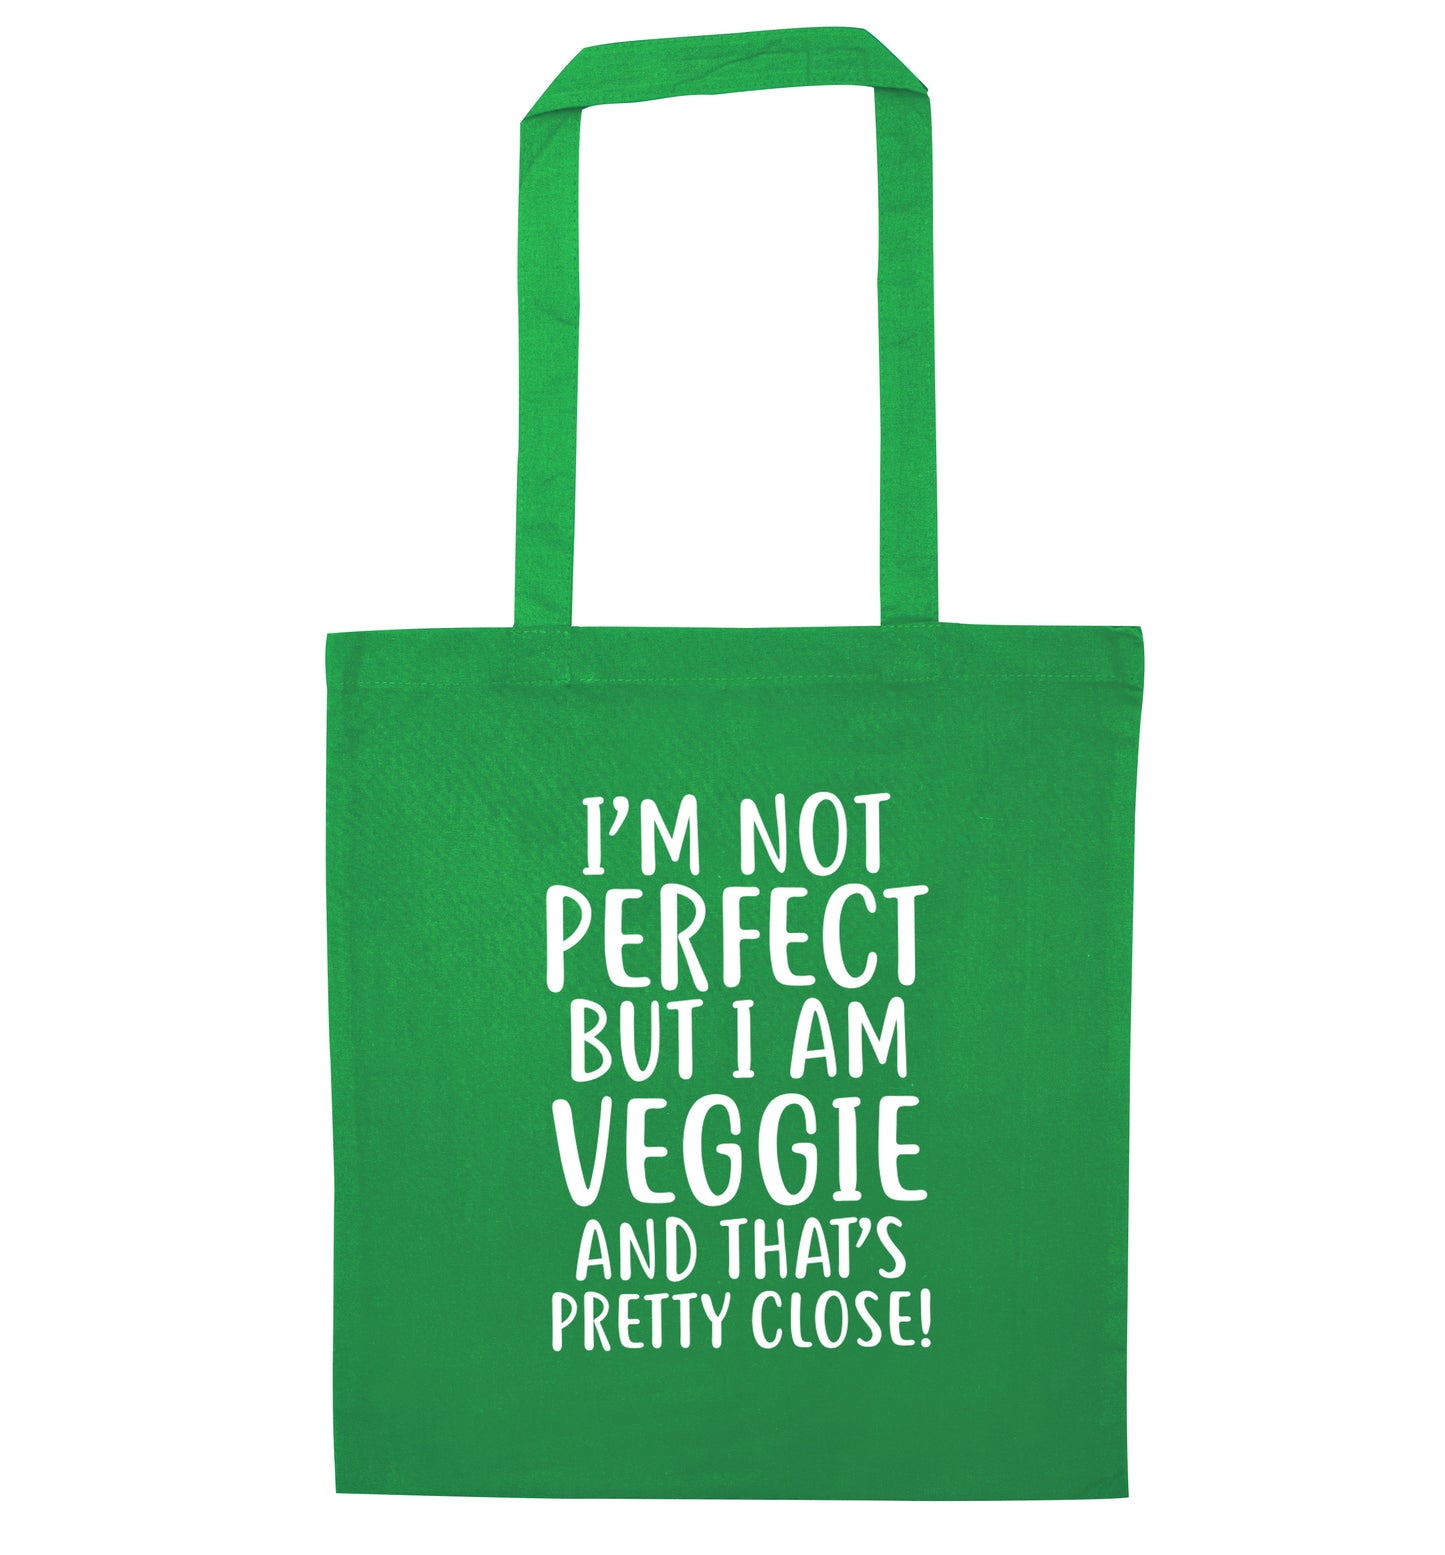 Might not be perfect but I am veggie green tote bag